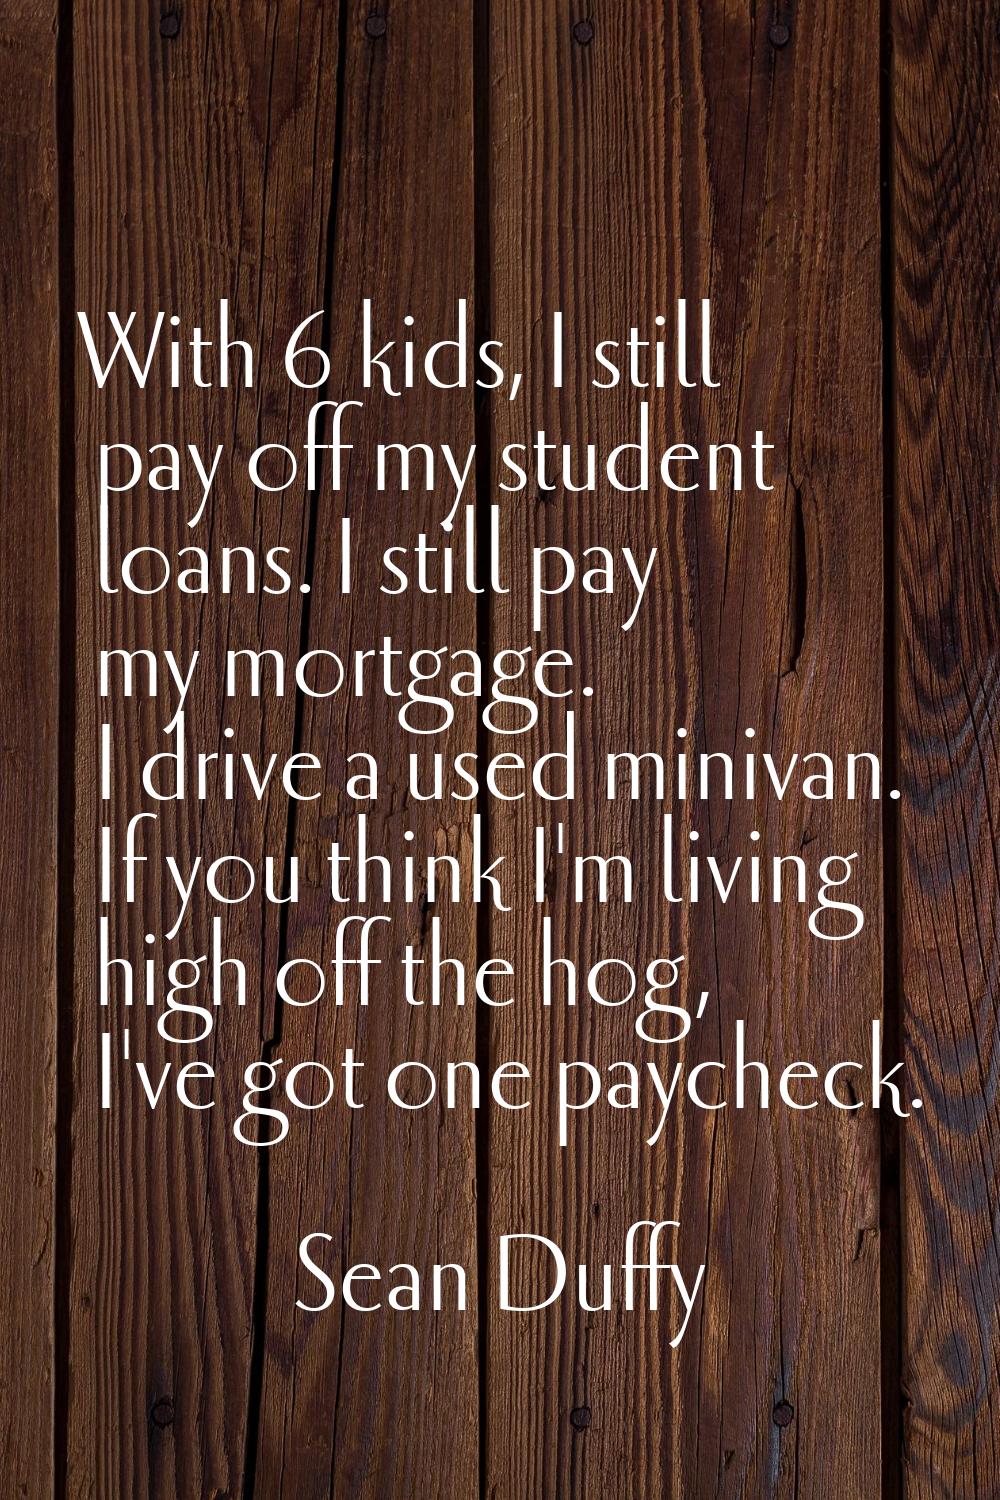 With 6 kids, I still pay off my student loans. I still pay my mortgage. I drive a used minivan. If 